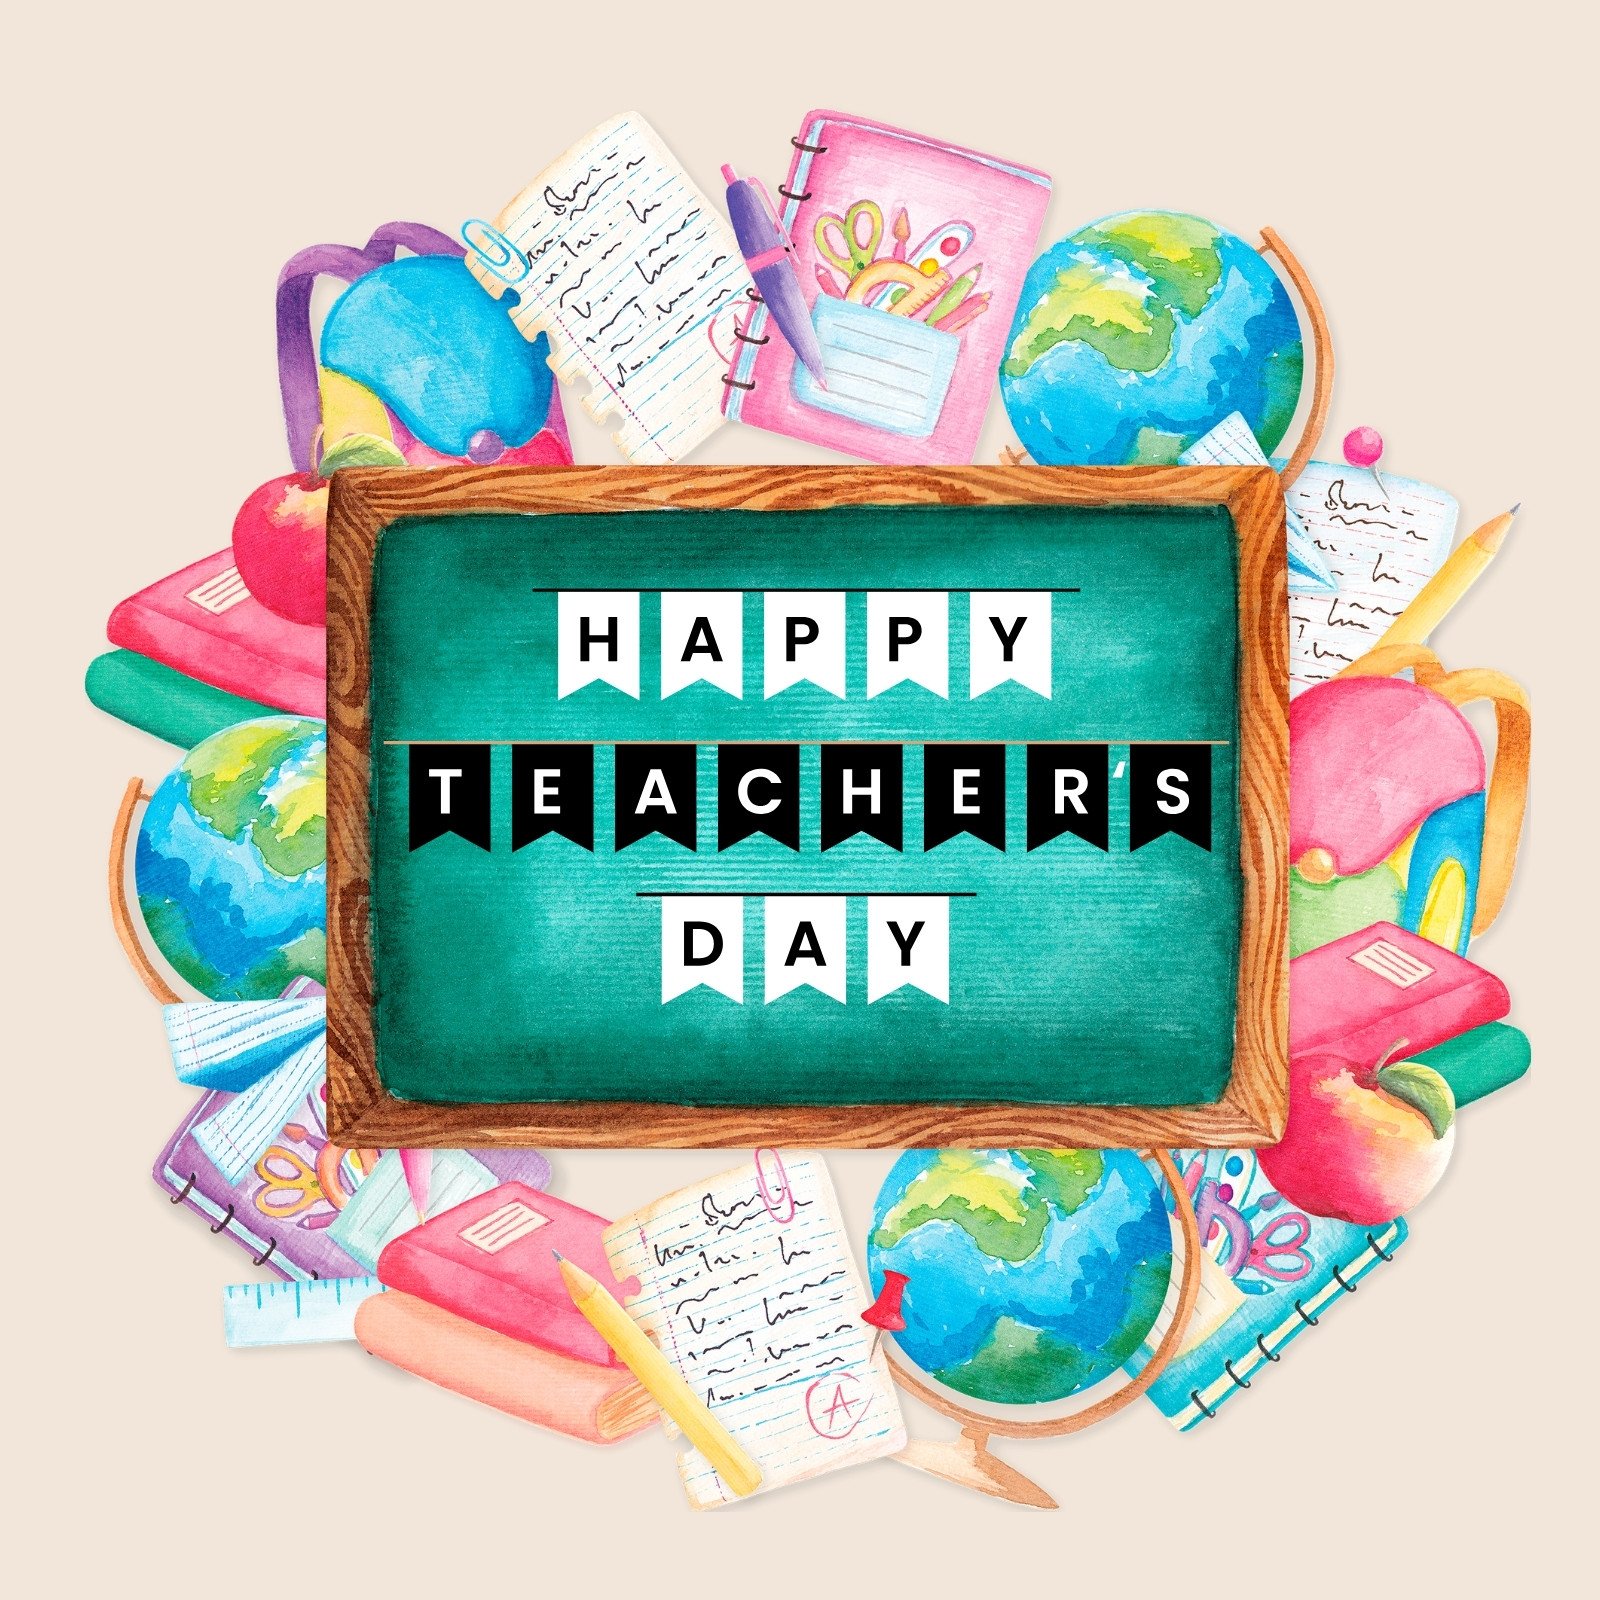 Free Happy Teachers Day Drawing - Download in Illustrator, PSD, EPS, SVG,  JPG, PNG | Template.net